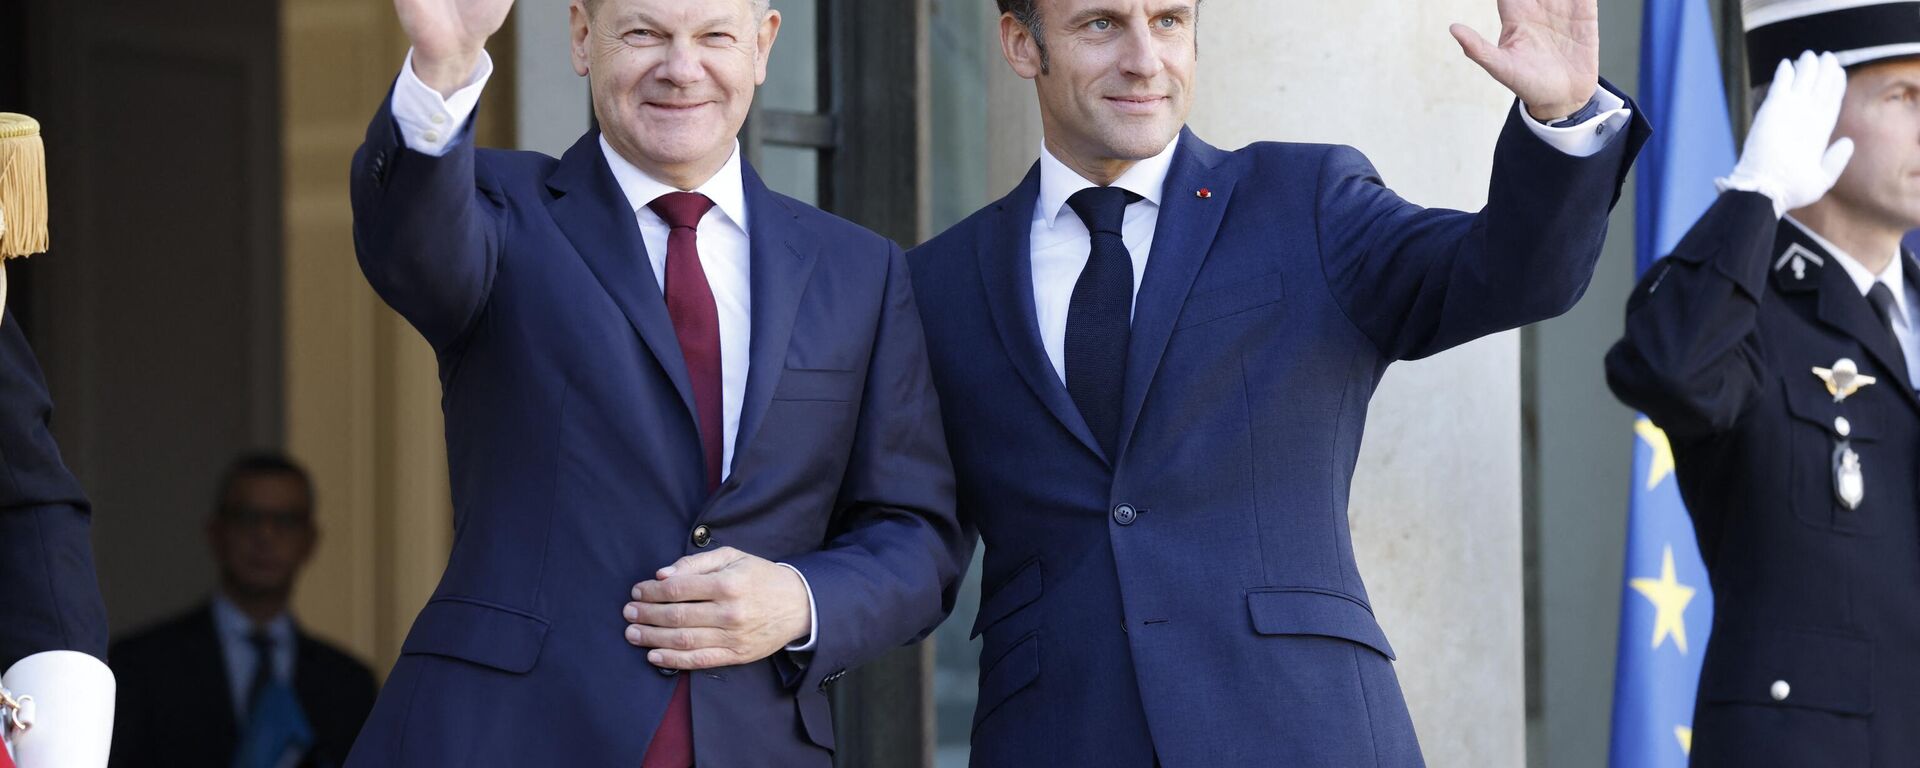 France's President Emmanuel Macron (R) and German Chancellor Olaf Scholz wave upon Scholz' arrival for a lunch at the presidential Elysee Palace in Paris on October 26, 2022 - Sputnik International, 1920, 26.11.2022